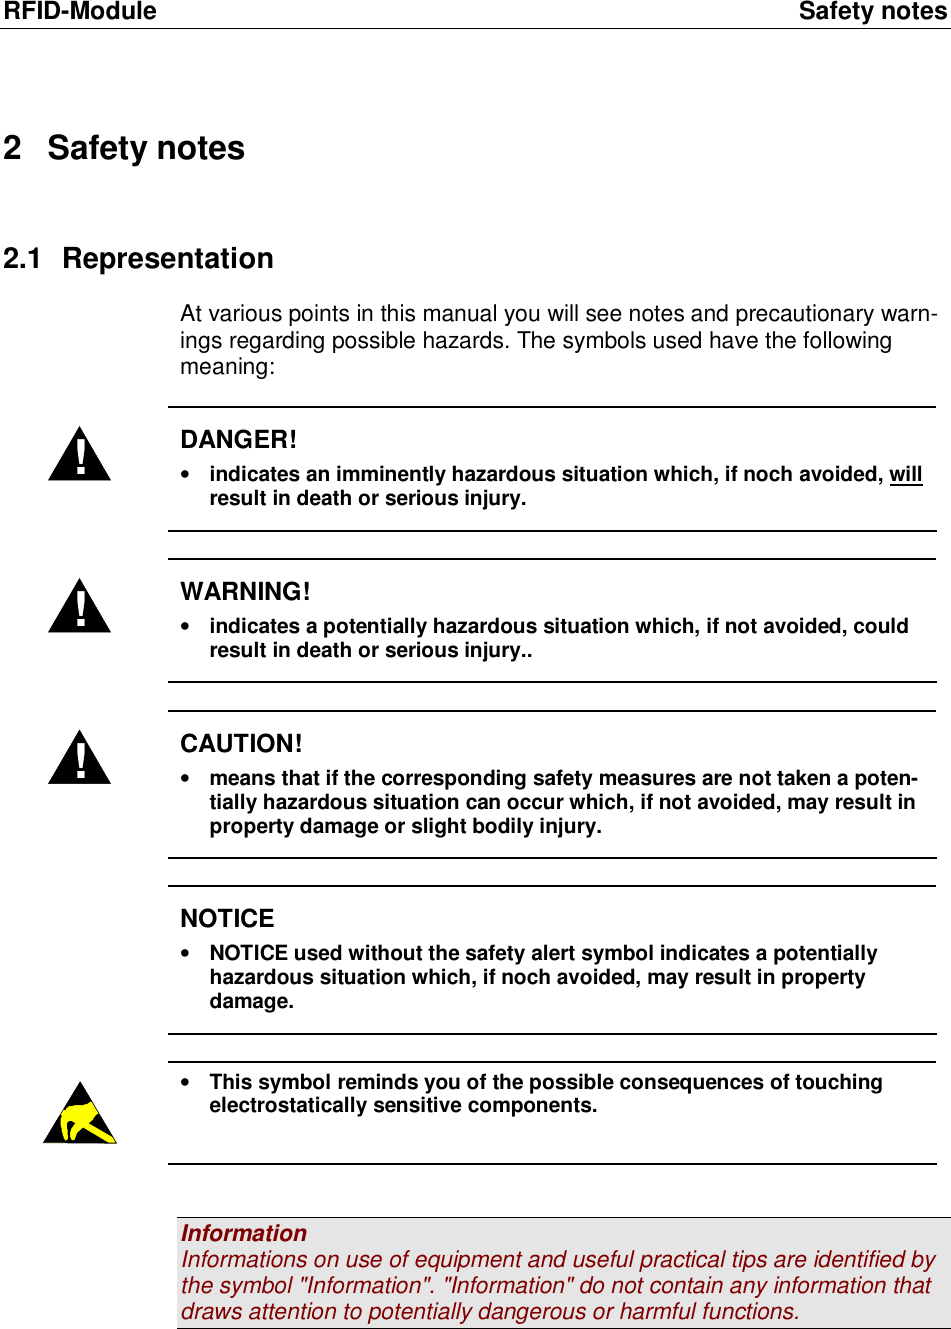 RFID-Module Safety notes 2 Safety notes 2.1 Representation At various points in this manual you will see notes and precautionary warn-ings regarding possible hazards. The symbols used have the following meaning:  ! DANGER! • indicates an imminently hazardous situation which, if noch avoided, will result in death or serious injury.  ! WARNING! • indicates a potentially hazardous situation which, if not avoided, could result in death or serious injury..  ! CAUTION! • means that if the corresponding safety measures are not taken a poten-tially hazardous situation can occur which, if not avoided, may result in property damage or slight bodily injury.   NOTICE • NOTICE used without the safety alert symbol indicates a potentially hazardous situation which, if noch avoided, may result in property damage.   • This symbol reminds you of the possible consequences of touching electrostatically sensitive components.   Information Informations on use of equipment and useful practical tips are identified by the symbol &quot;Information&quot;. &quot;Information&quot; do not contain any information that draws attention to potentially dangerous or harmful functions.   